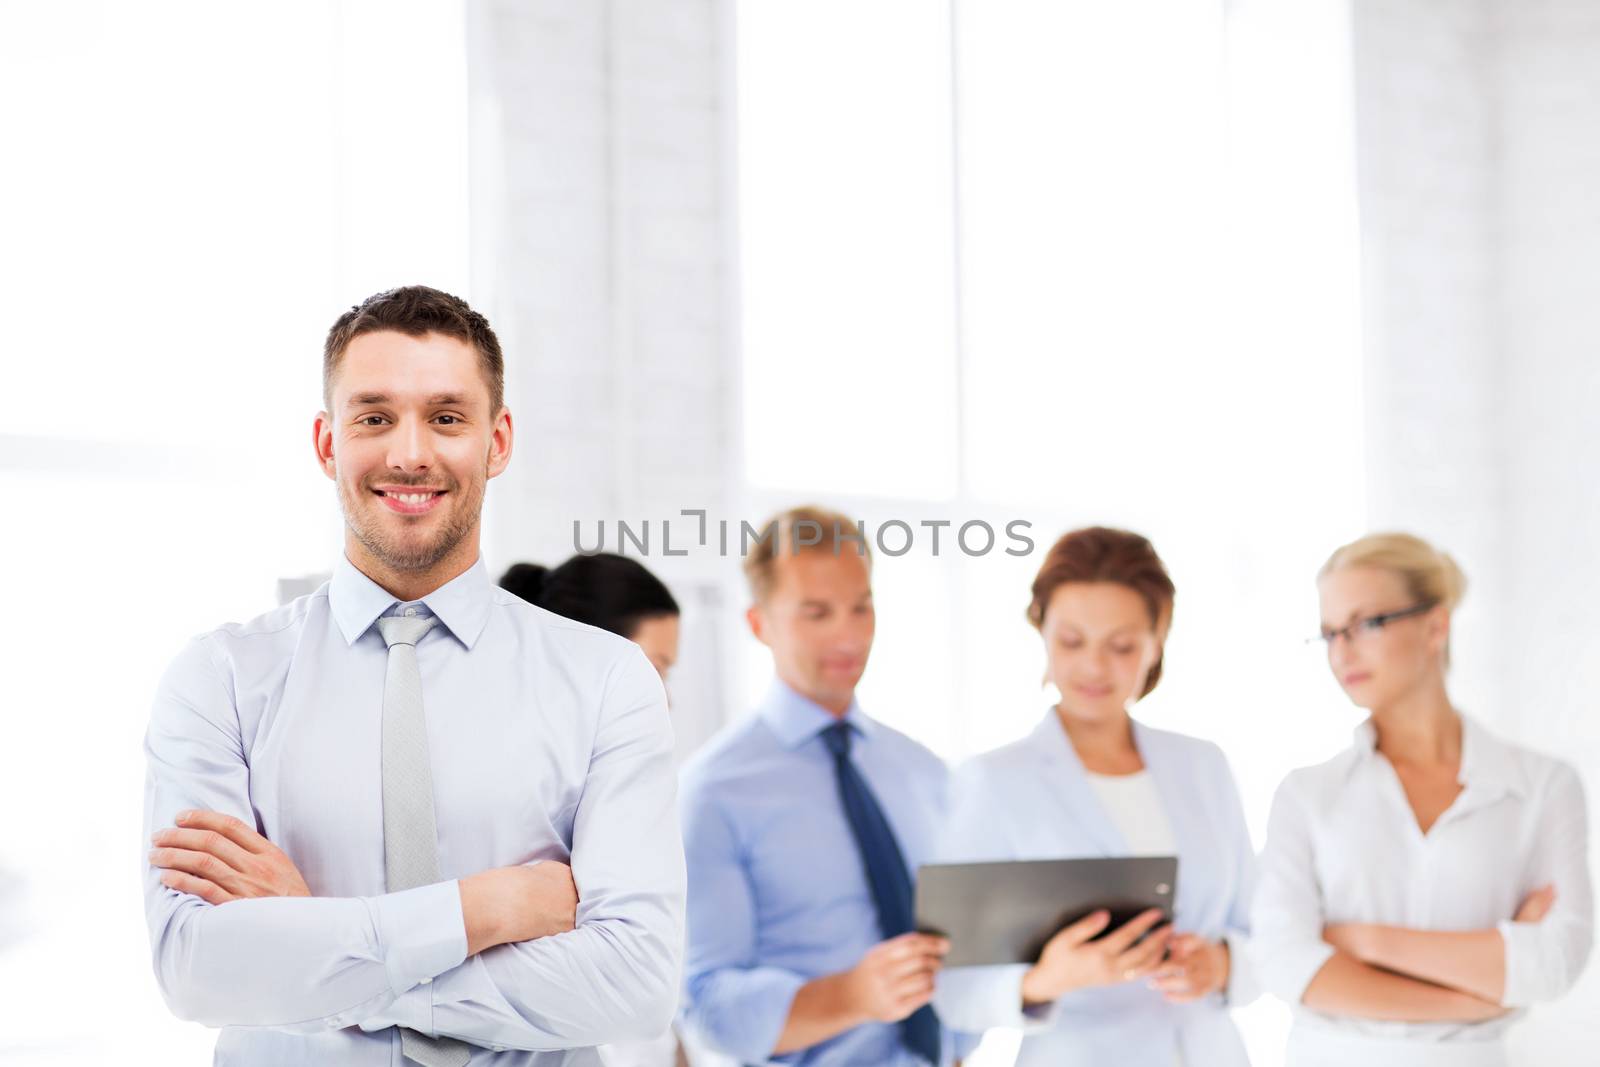 picture of smiling handsome businessman in office